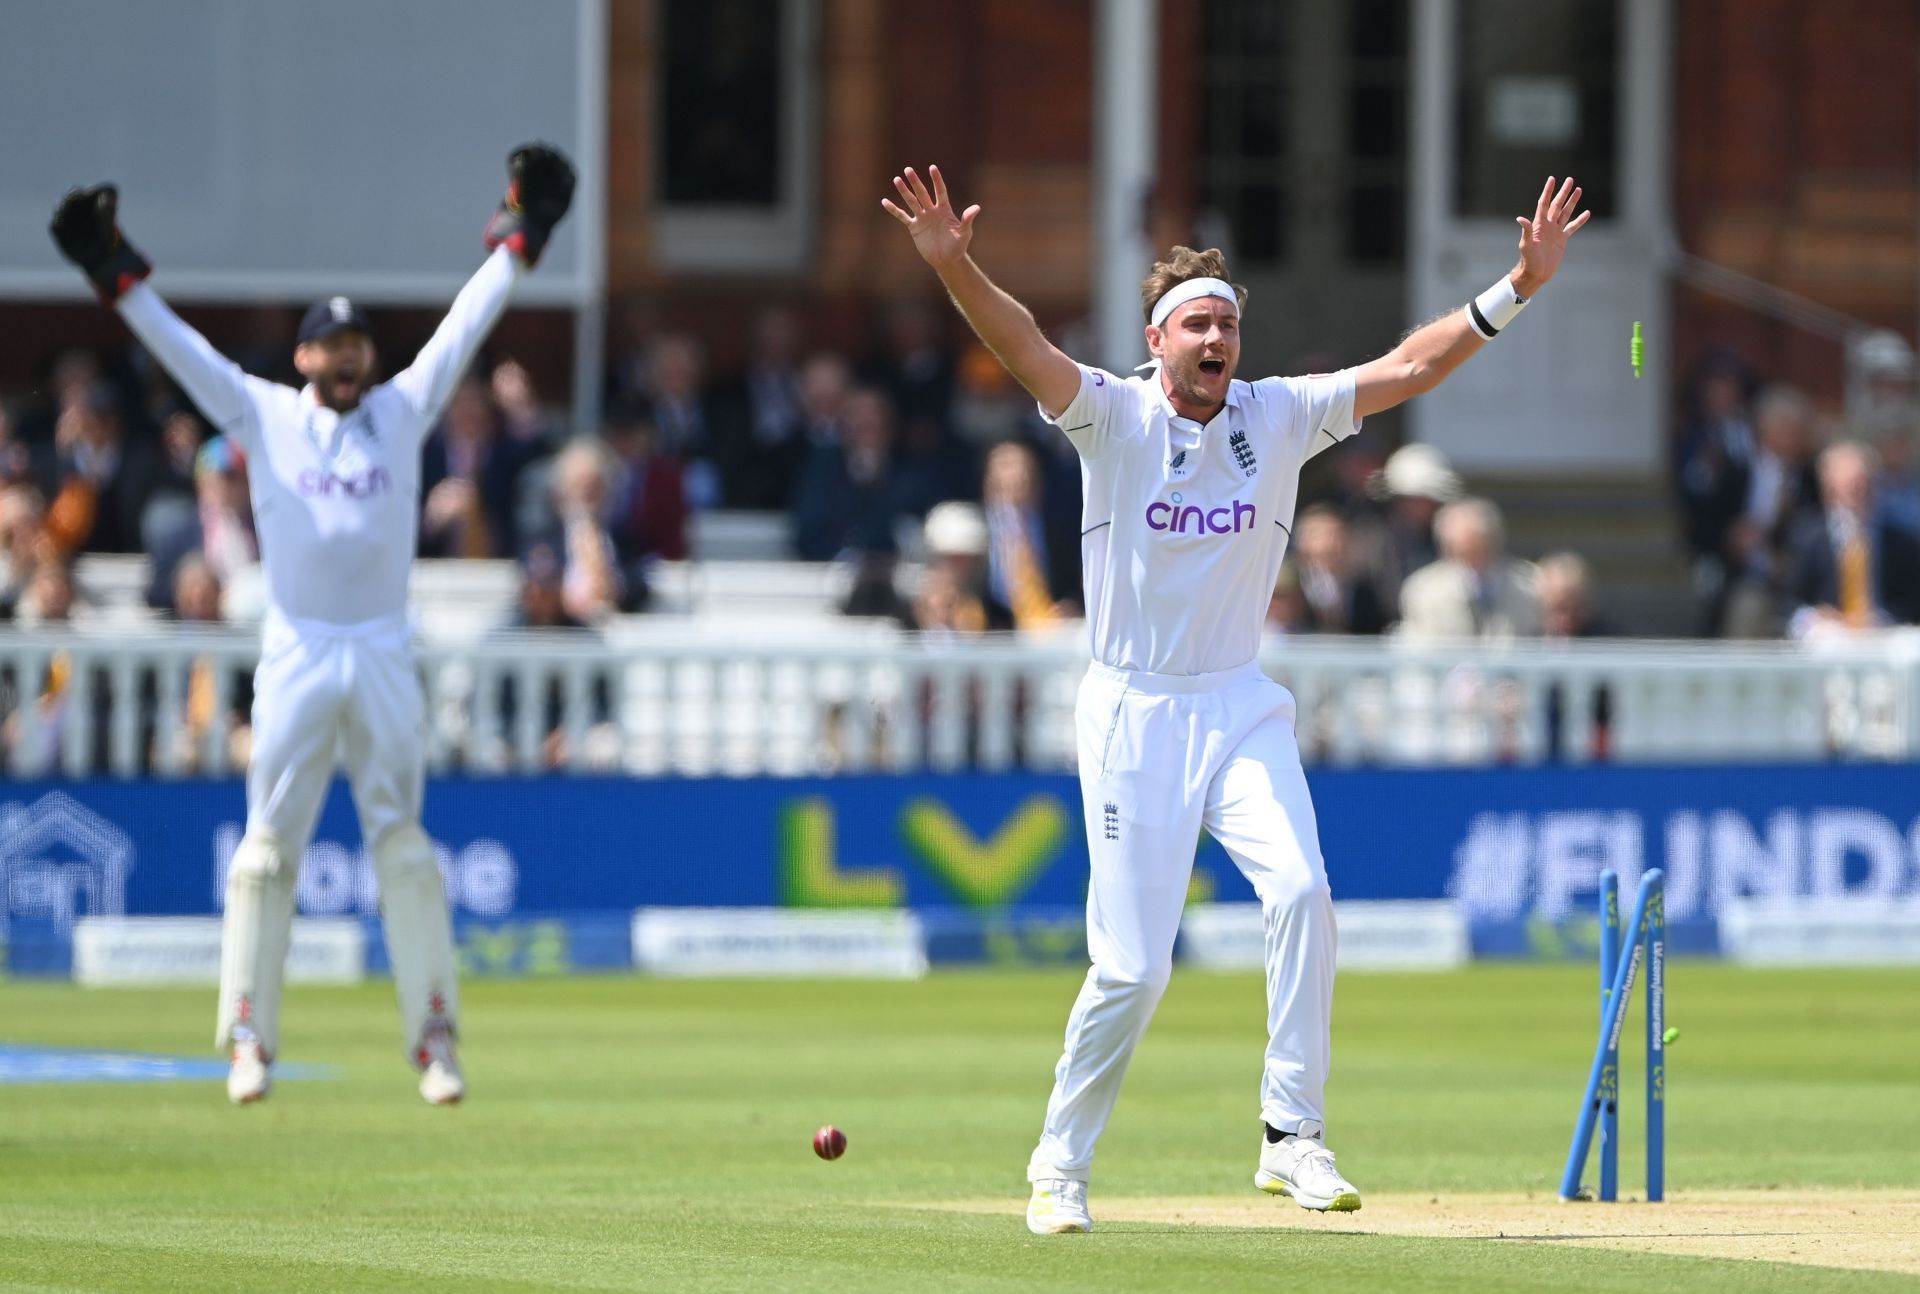 Stuart Broad was not considered for selection for the tour of West Indies (Credit: Getty Images)